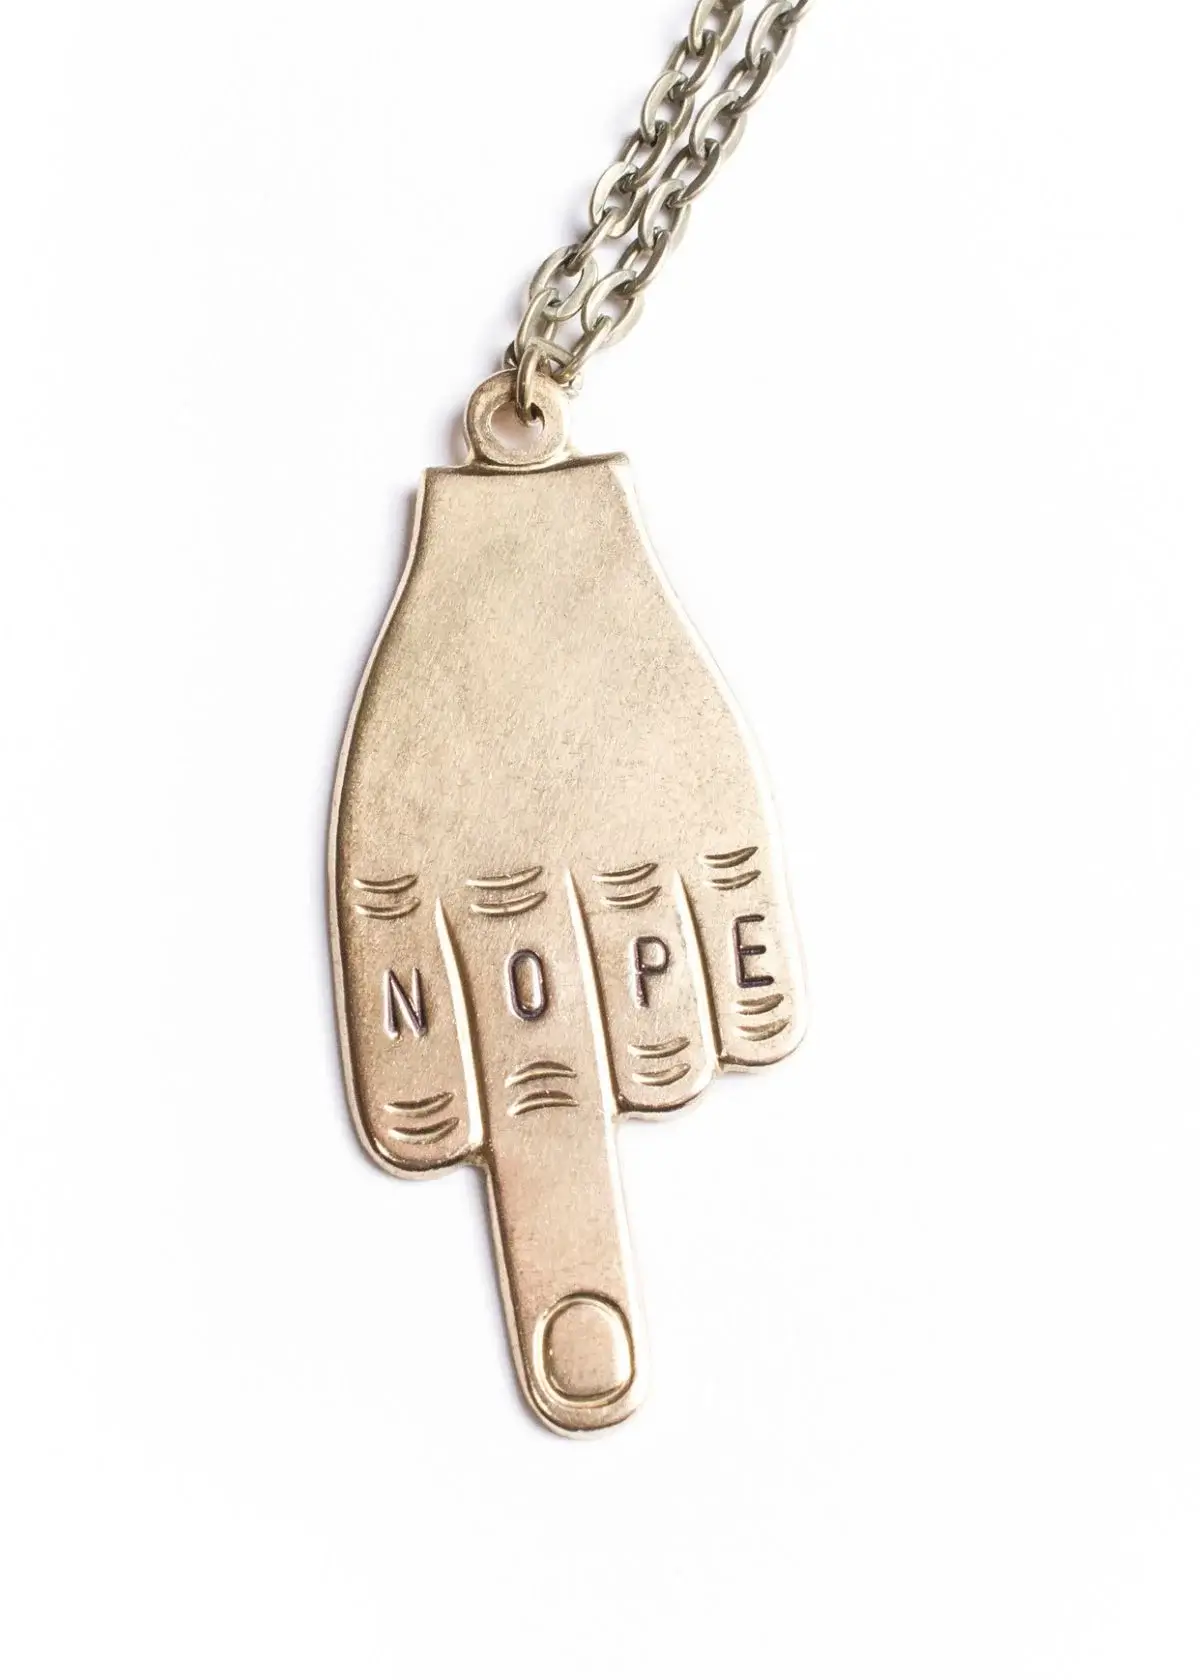 What type of Metal is used to Make a middle finger Necklace?